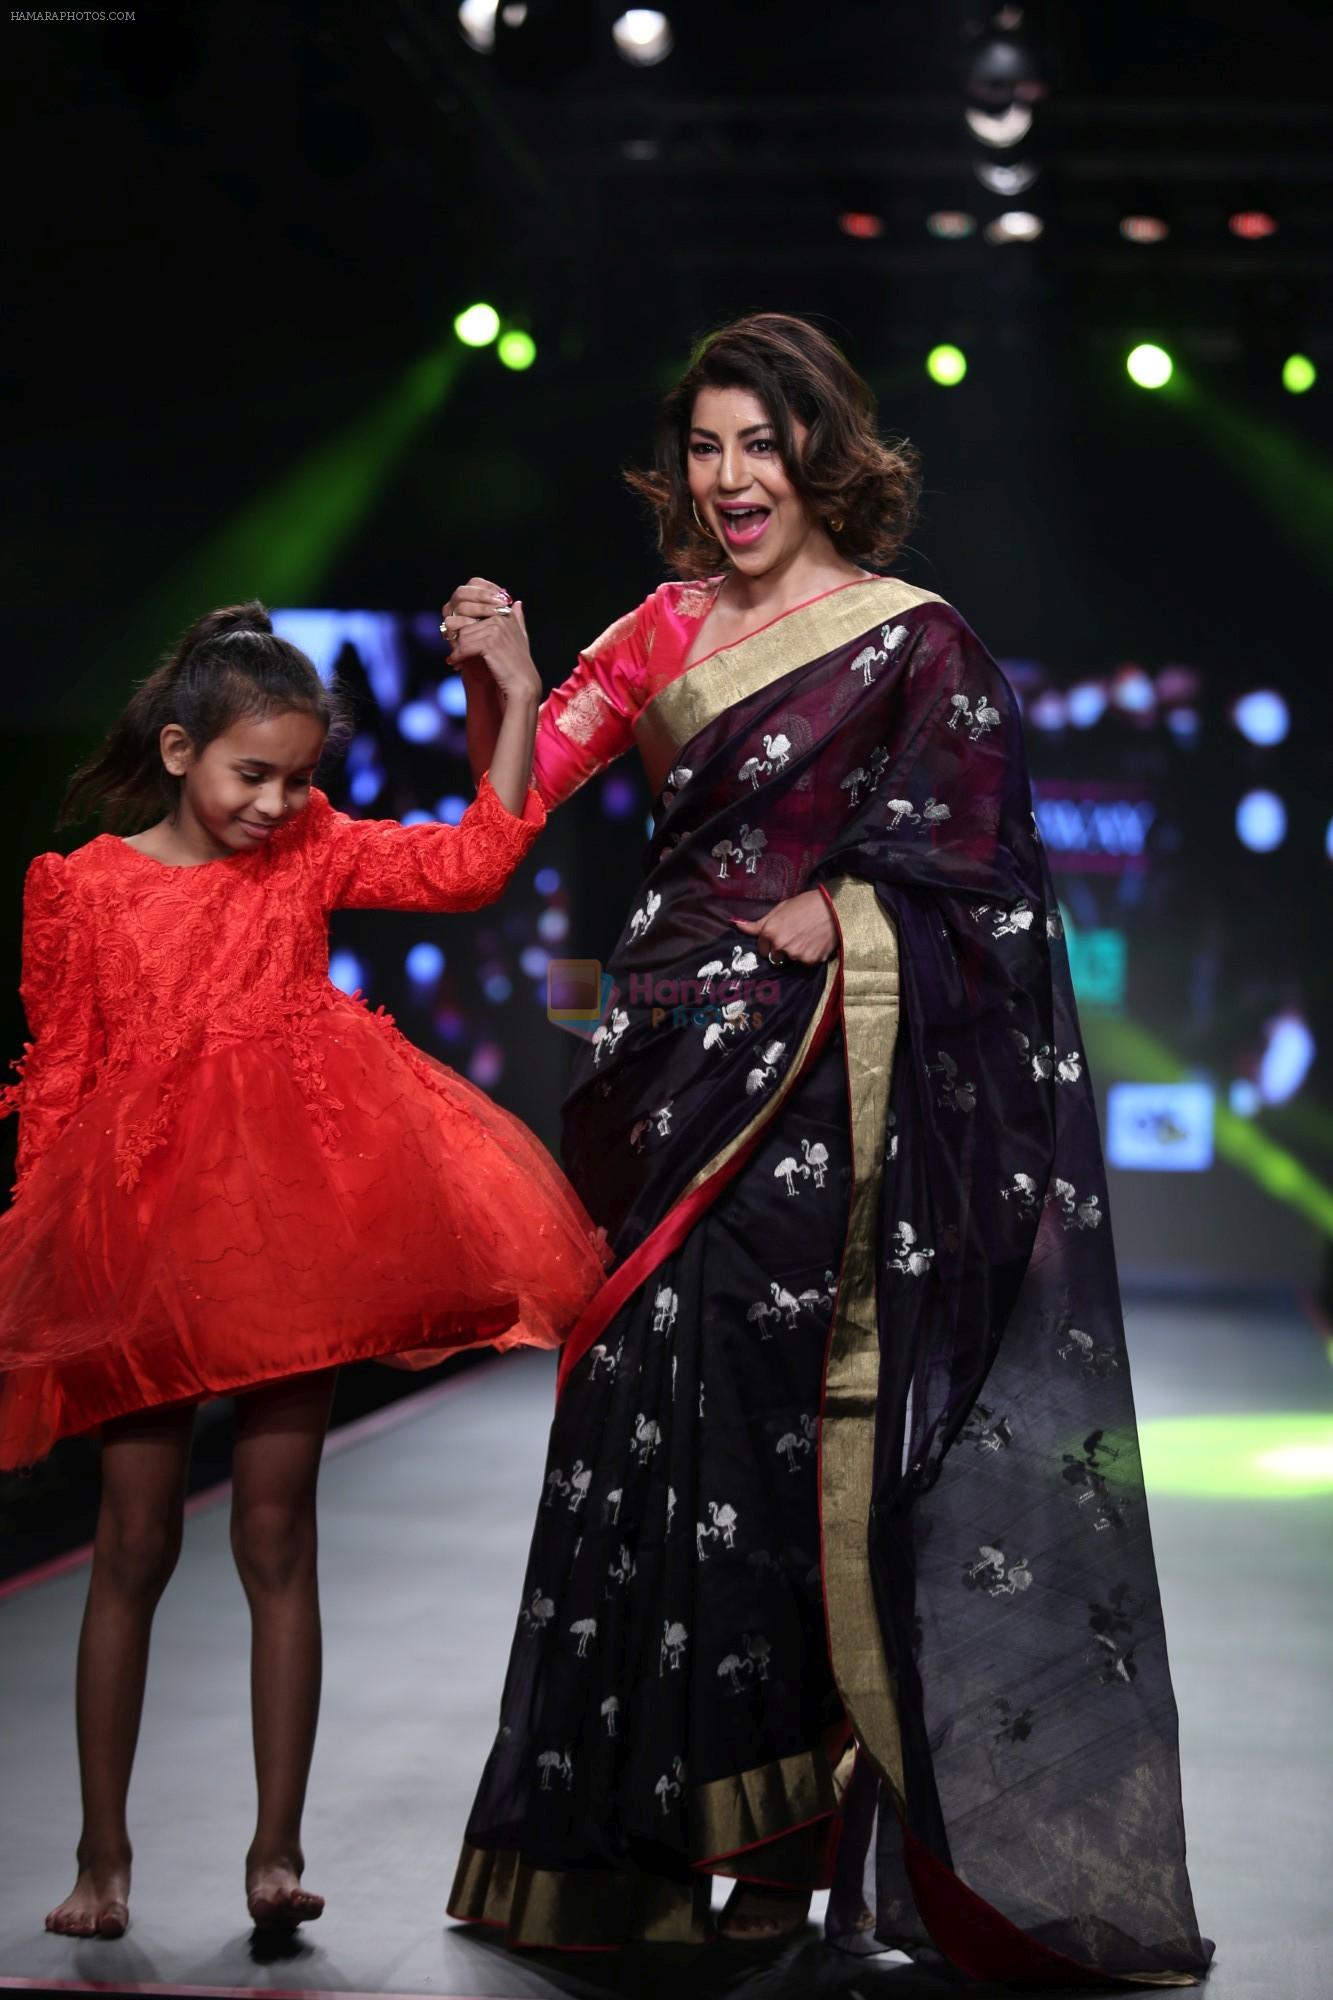 Debina Banerjee at Smile Foundation & Designer Sailesh Singhania fashion show for the 13th edition of Ramp for Champs at the race course in mahalxmi on 13th Feb 2019